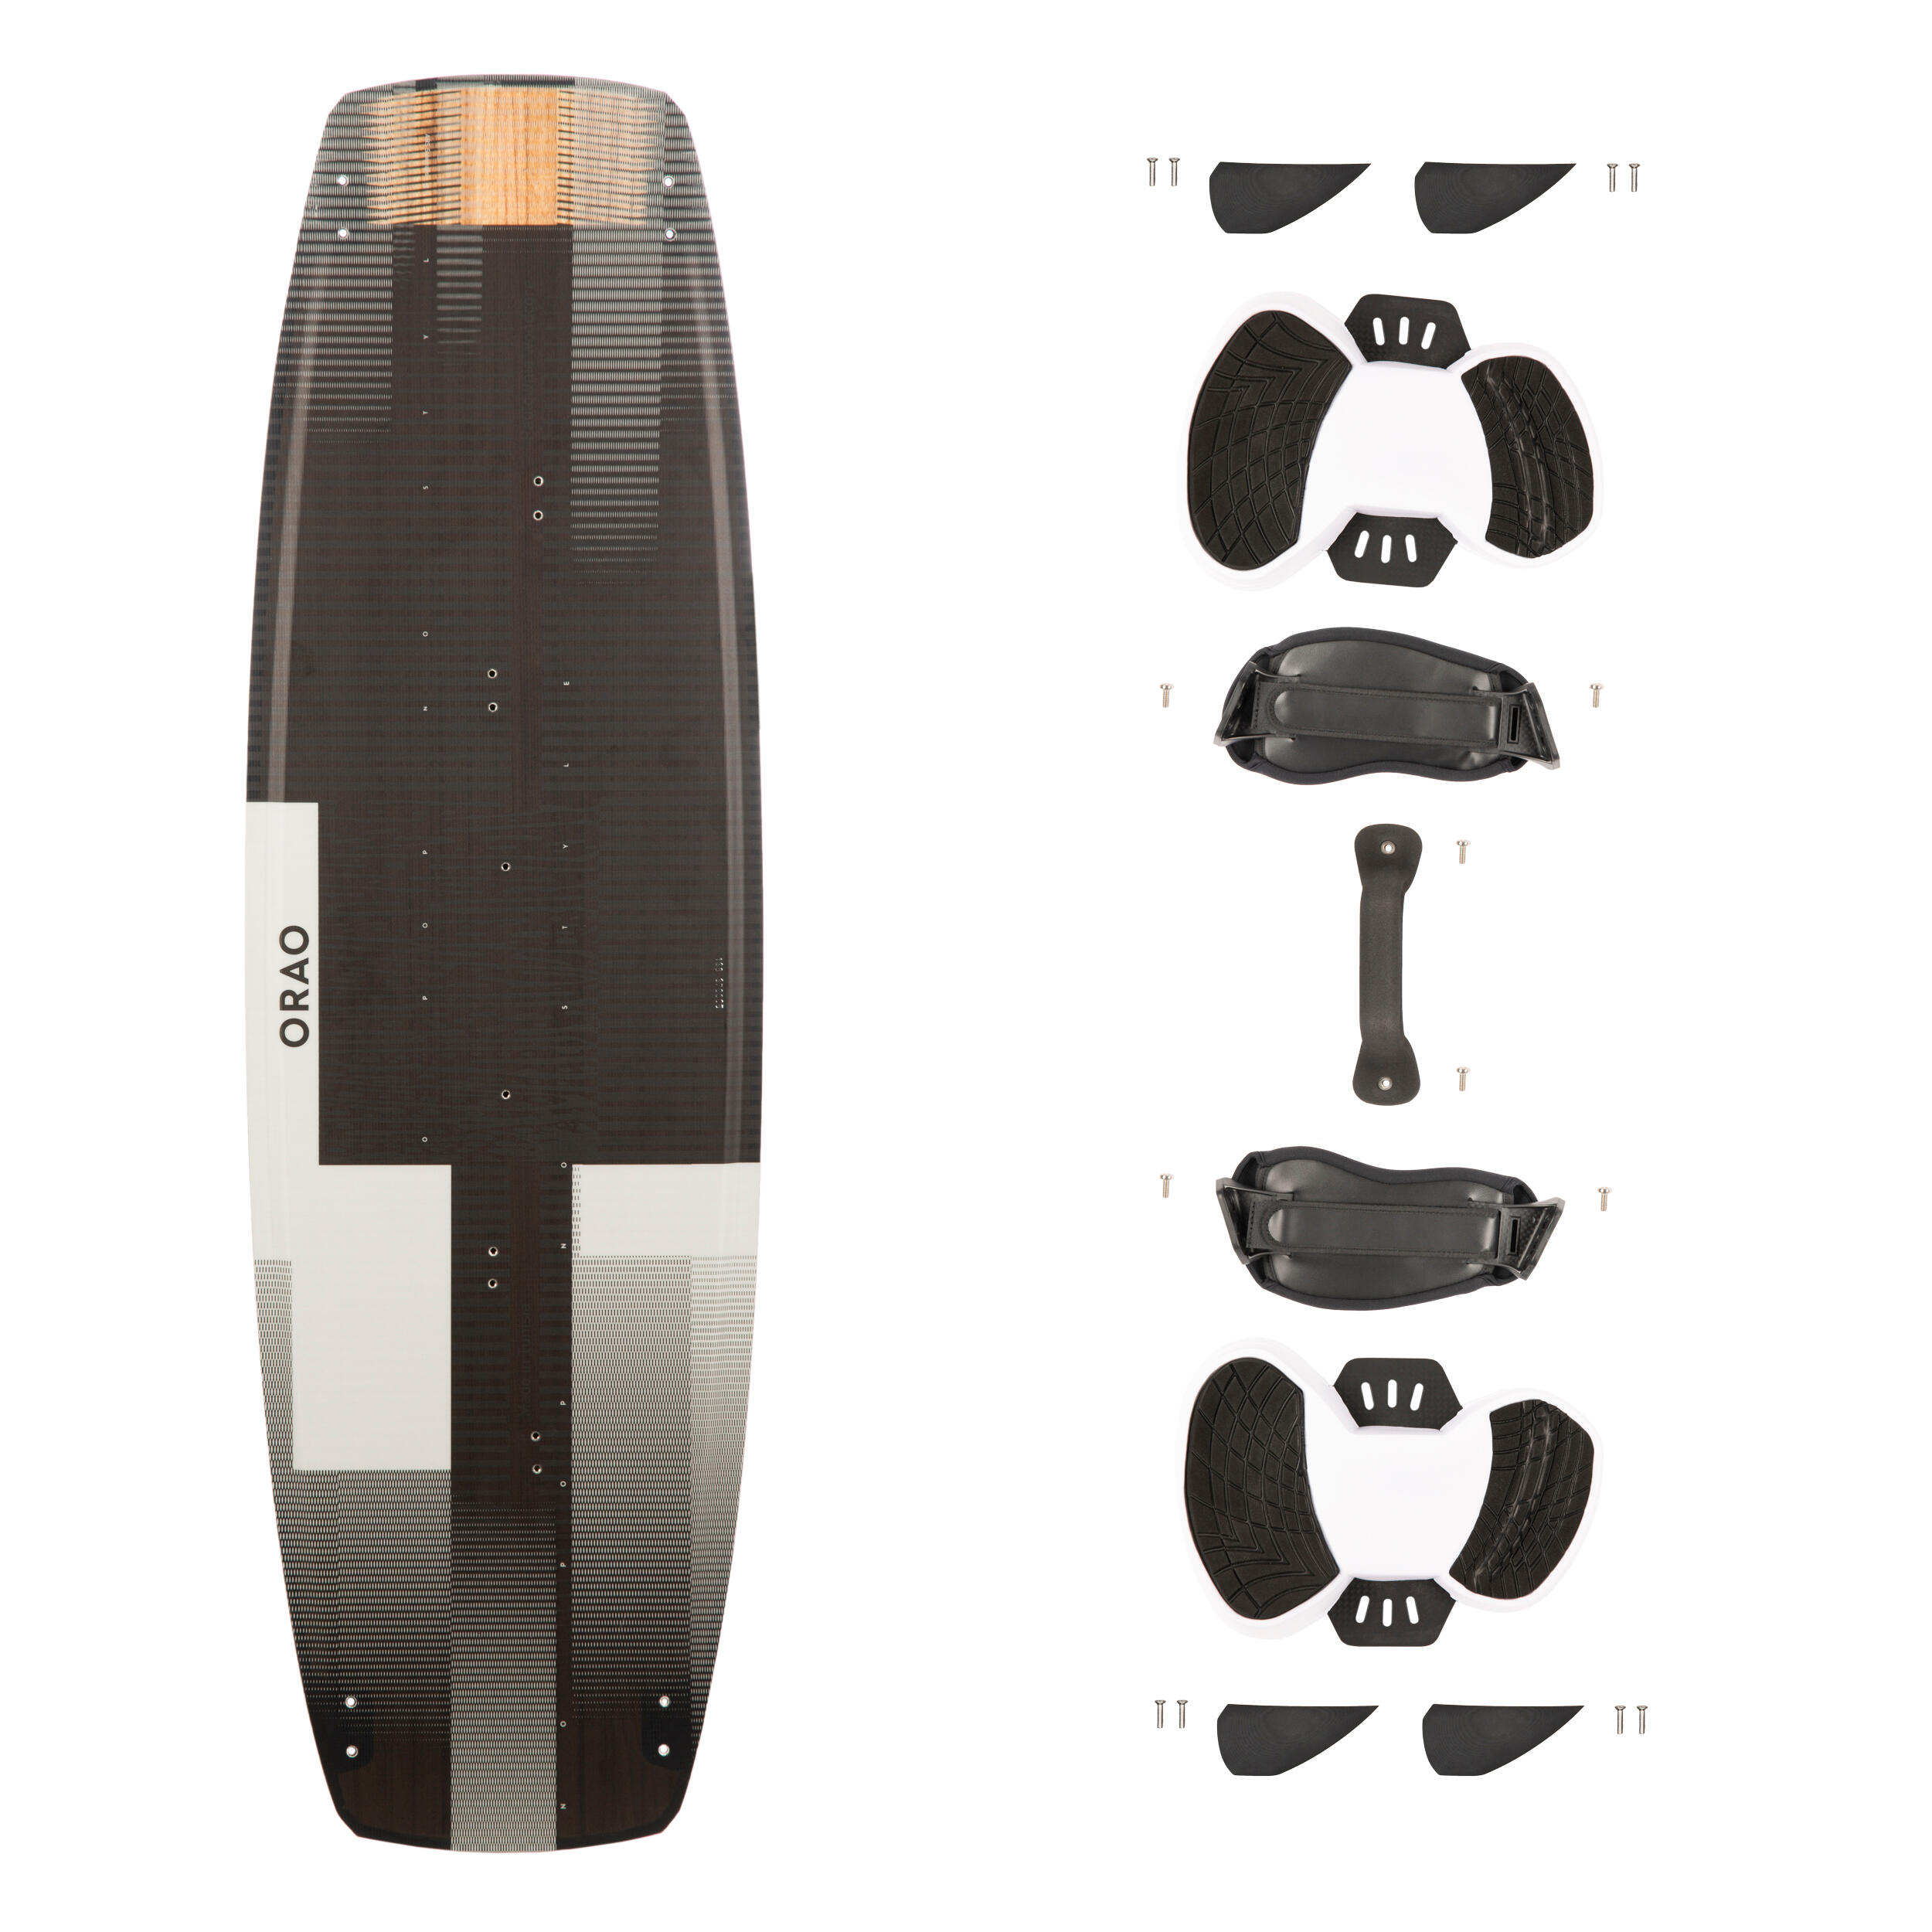 ORAO Twintip carbon kitesurf board 138 x 41 cm (pads and straps included) - TT500